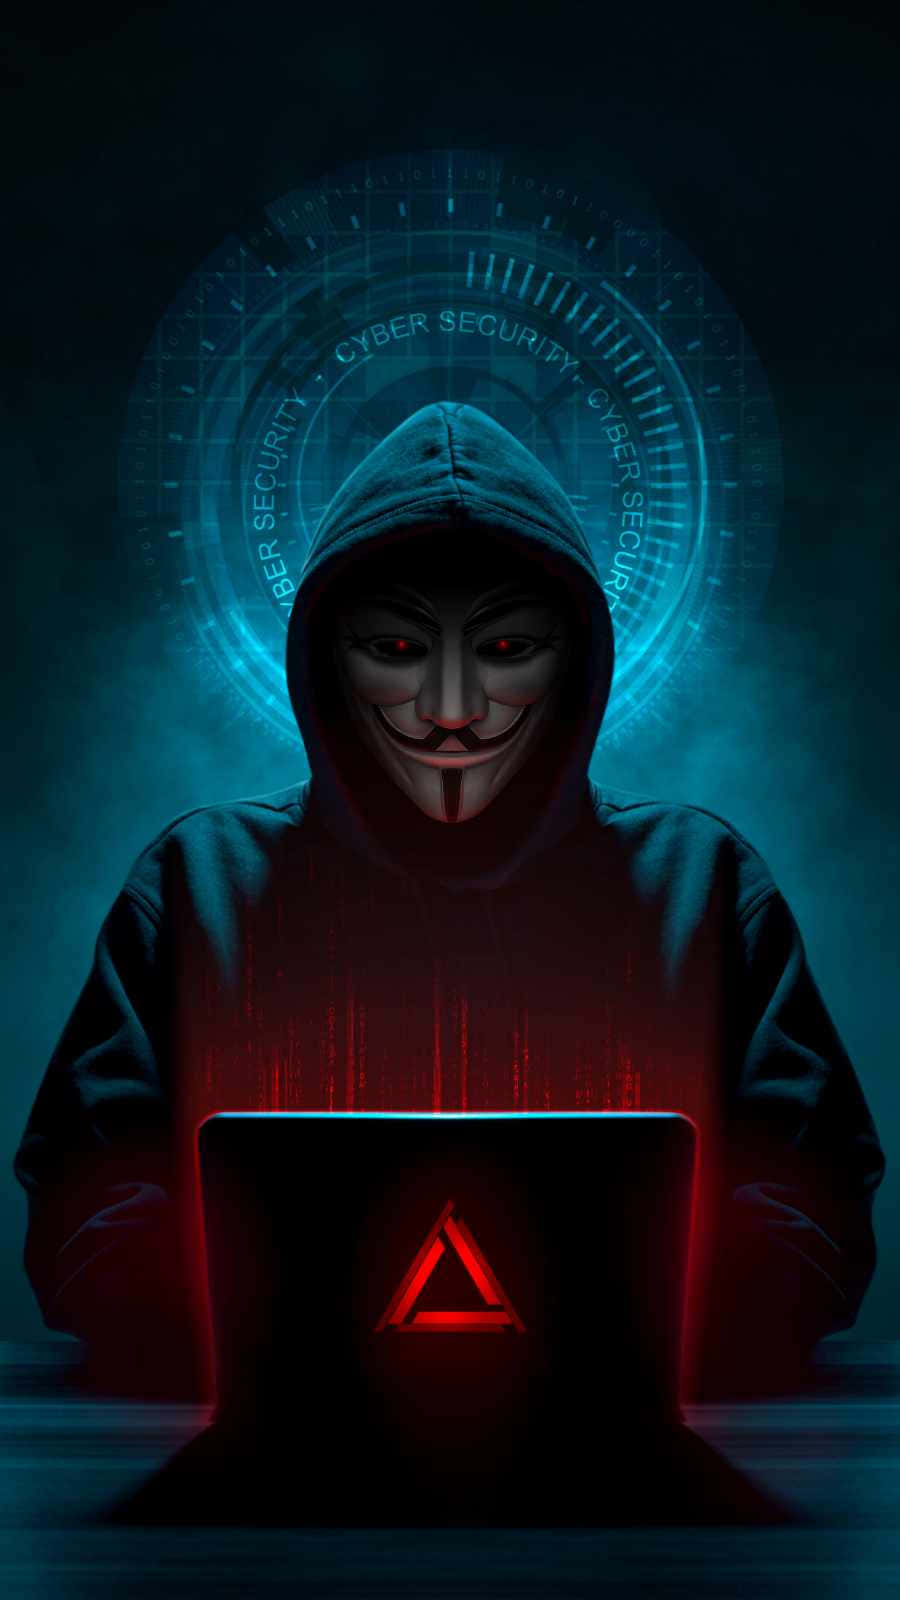 Cybersecurity Hackerwith Laptop Wallpaper